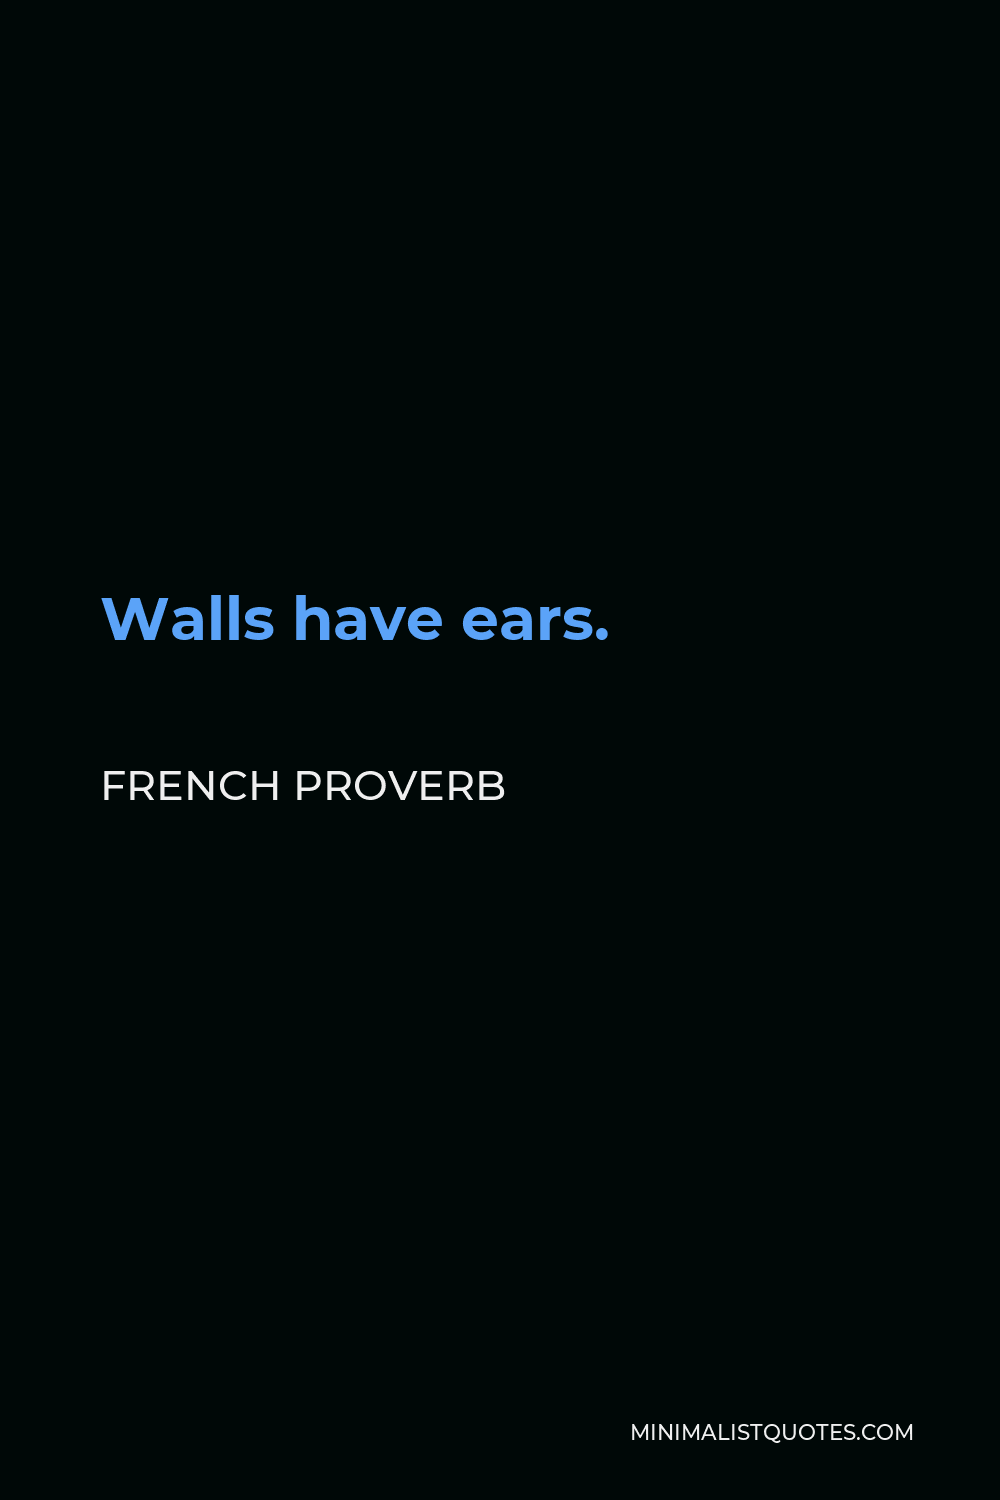 French Proverb Quote - Walls have ears.